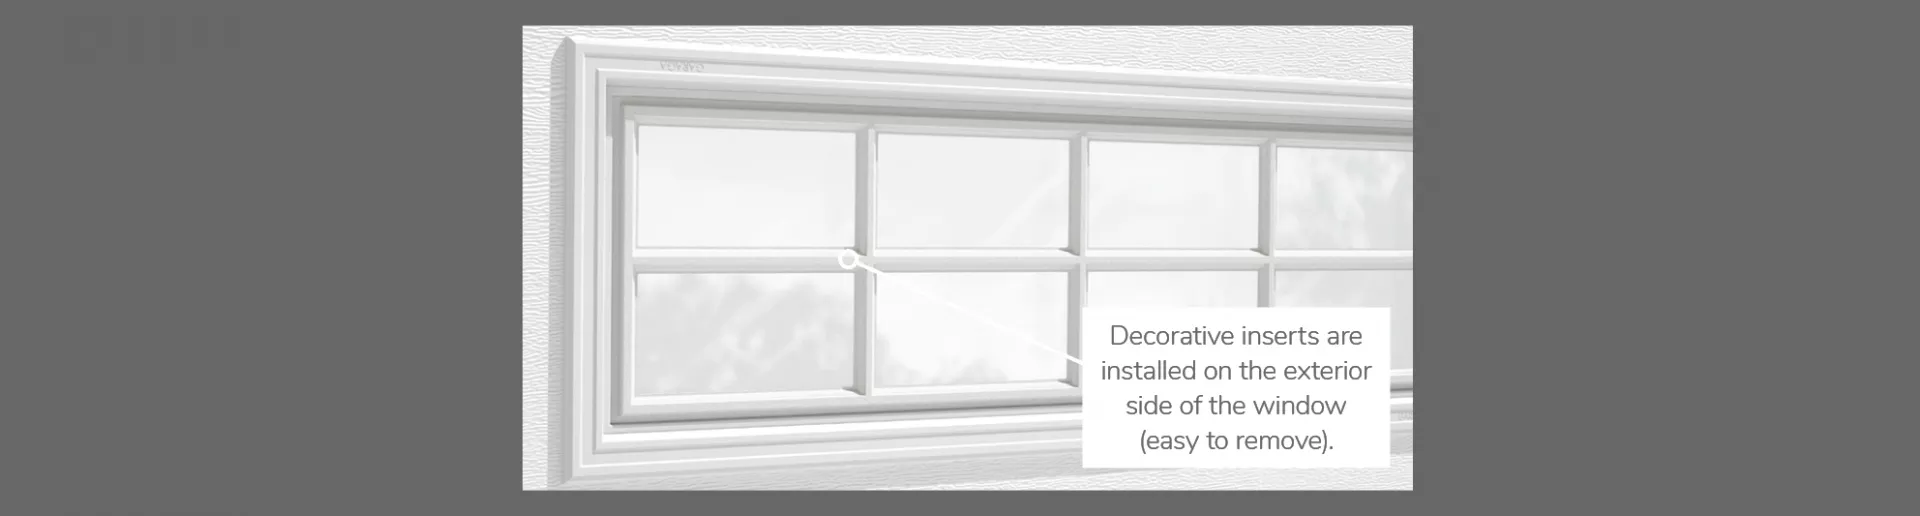 Stockton Decorative Insert, 41" x 16", available for door 3 layers - Polystyrene, 2 layers - Polystyrene and Non-insulated